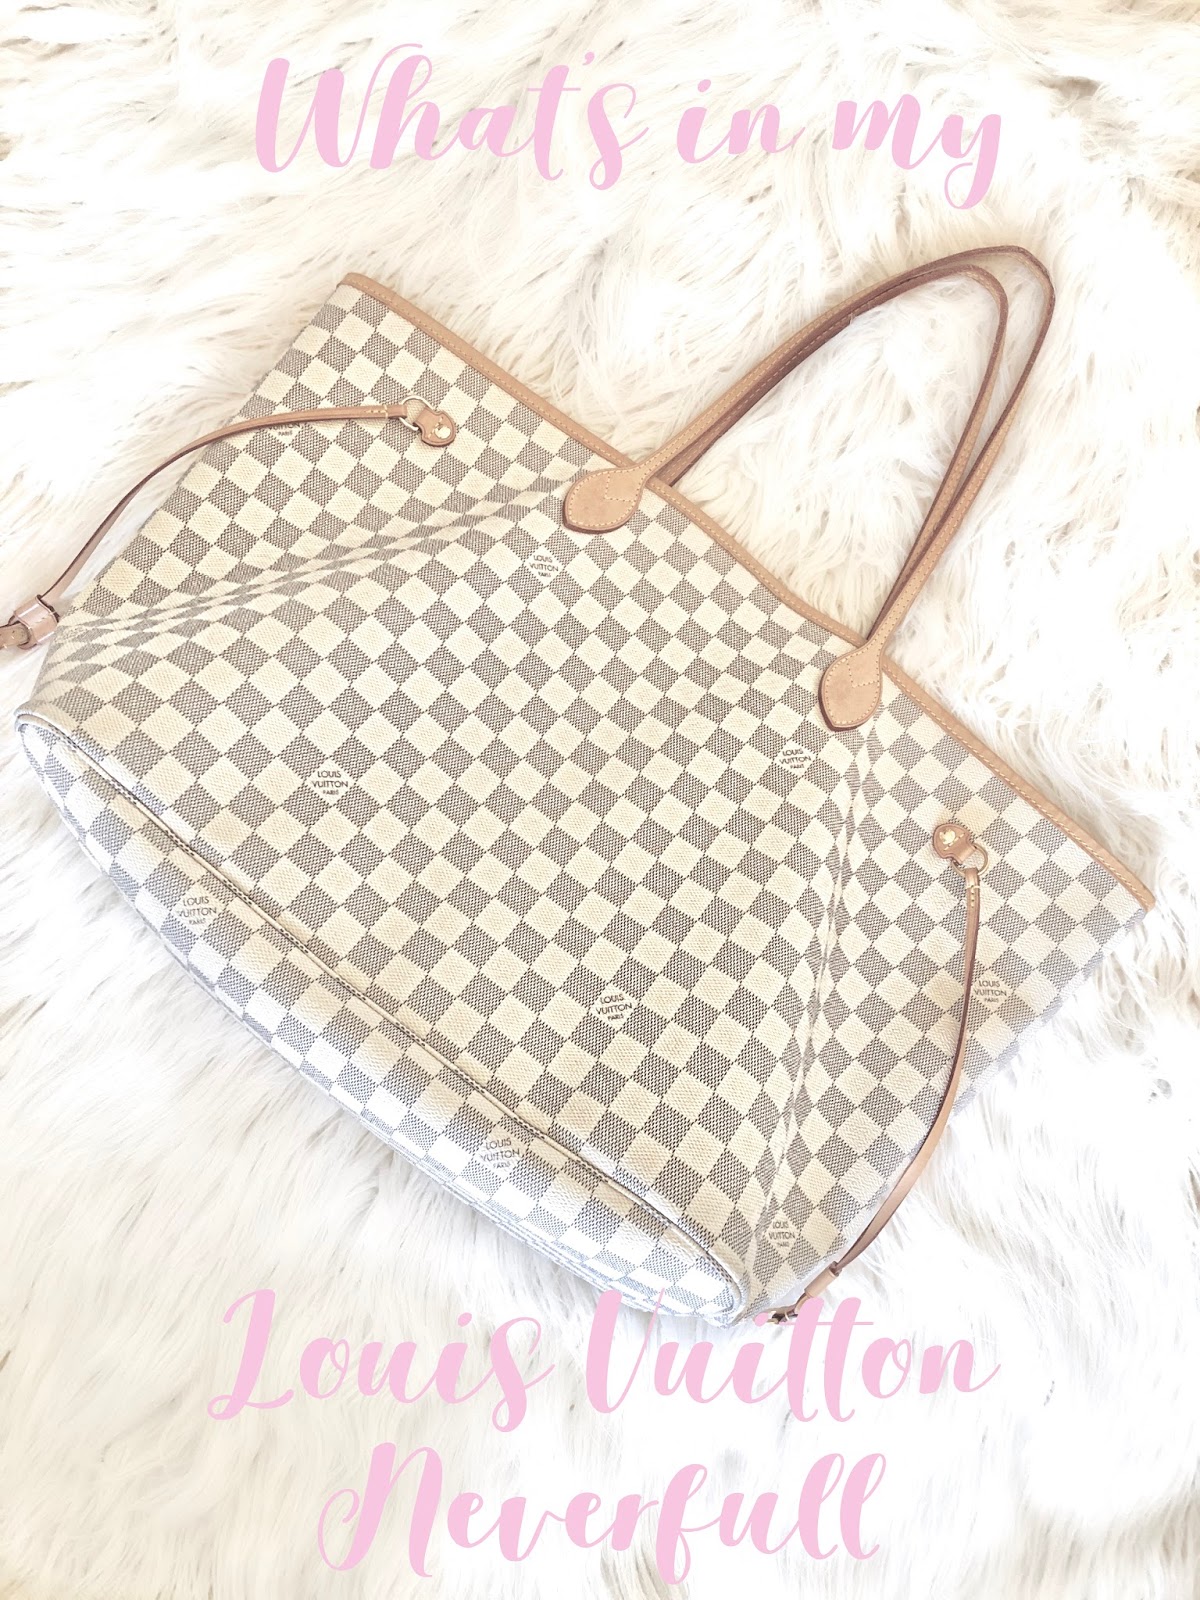 Need advice on cleaning and restoring my Neverfull.. I might have  already ruined it : r/Louisvuitton